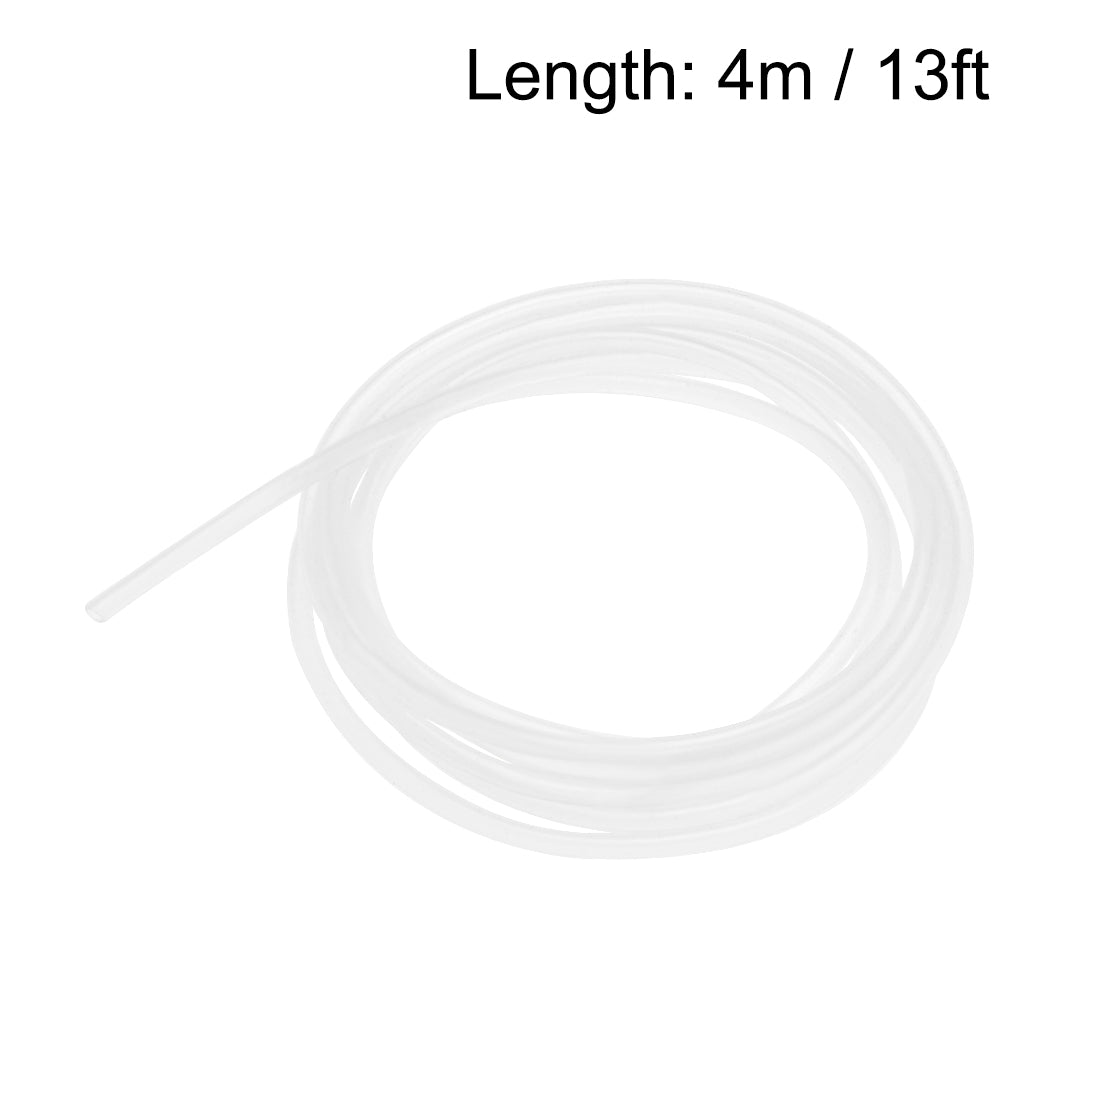 Uxcell Uxcell Silicone Tube, 3/8 inch ID x 1/2 inch OD 4m/13ft  Tubing Clear